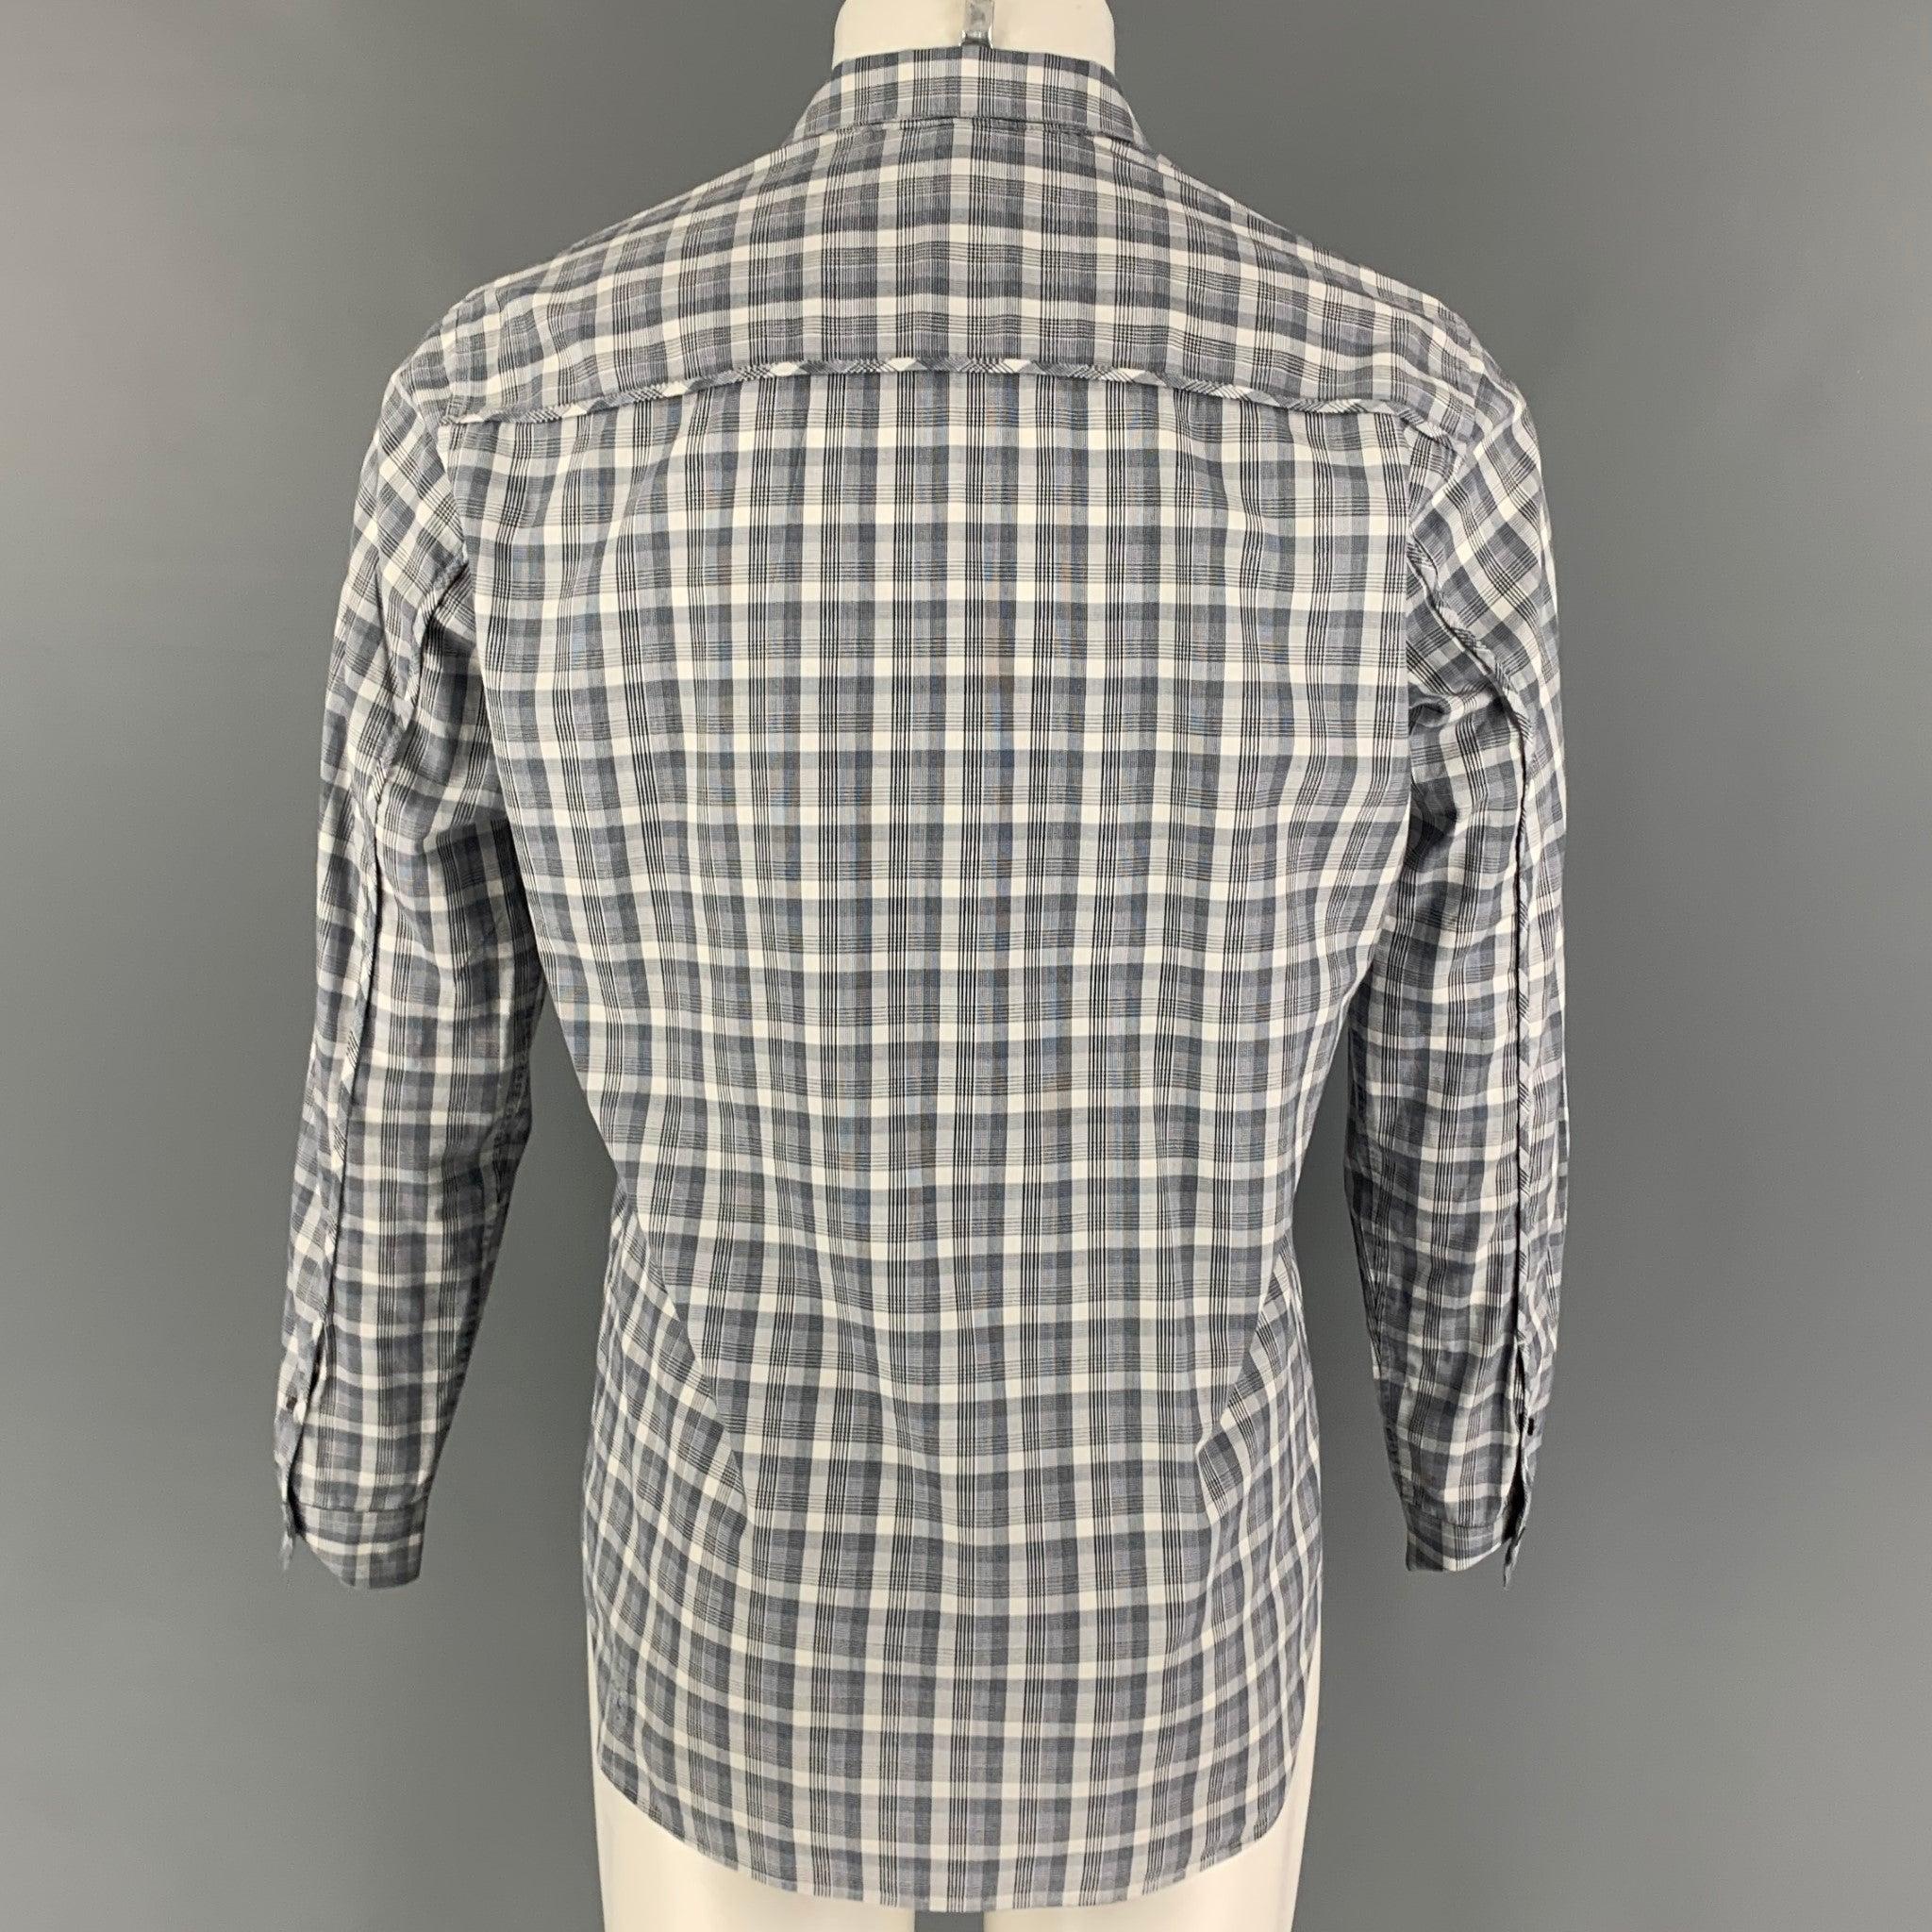 THEORY Size M Grey White Plaid Cotton Long Sleeve Shirt In Good Condition For Sale In San Francisco, CA